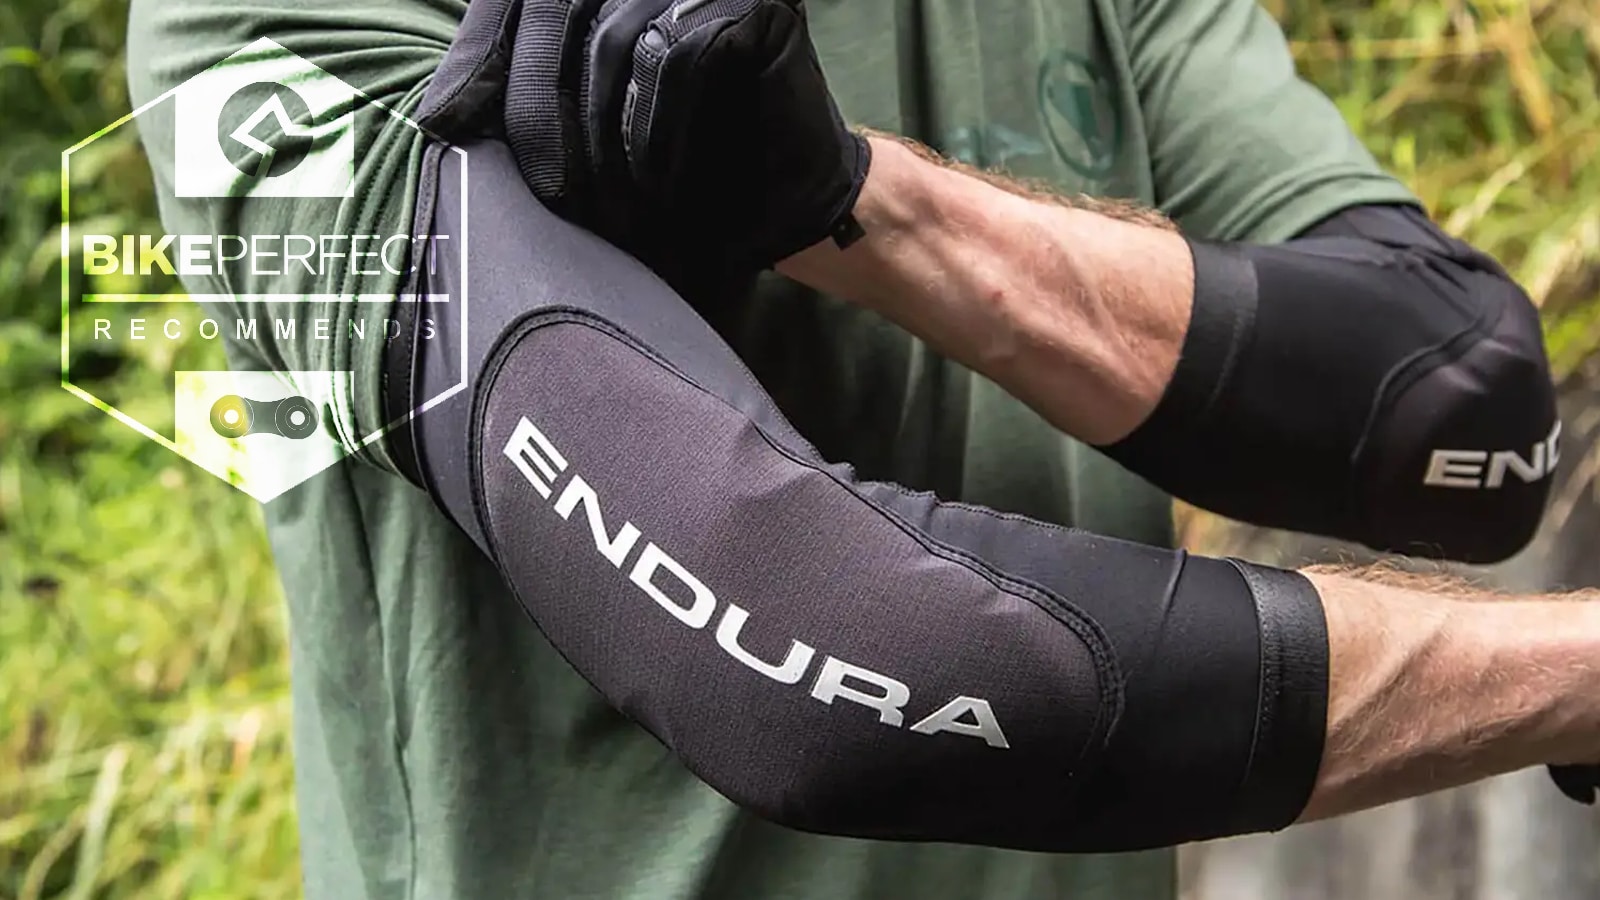 The ideal mountain bike body armor upgrade would be hardshell elbow guards, but these padded elbow guards can still offer enough protection.